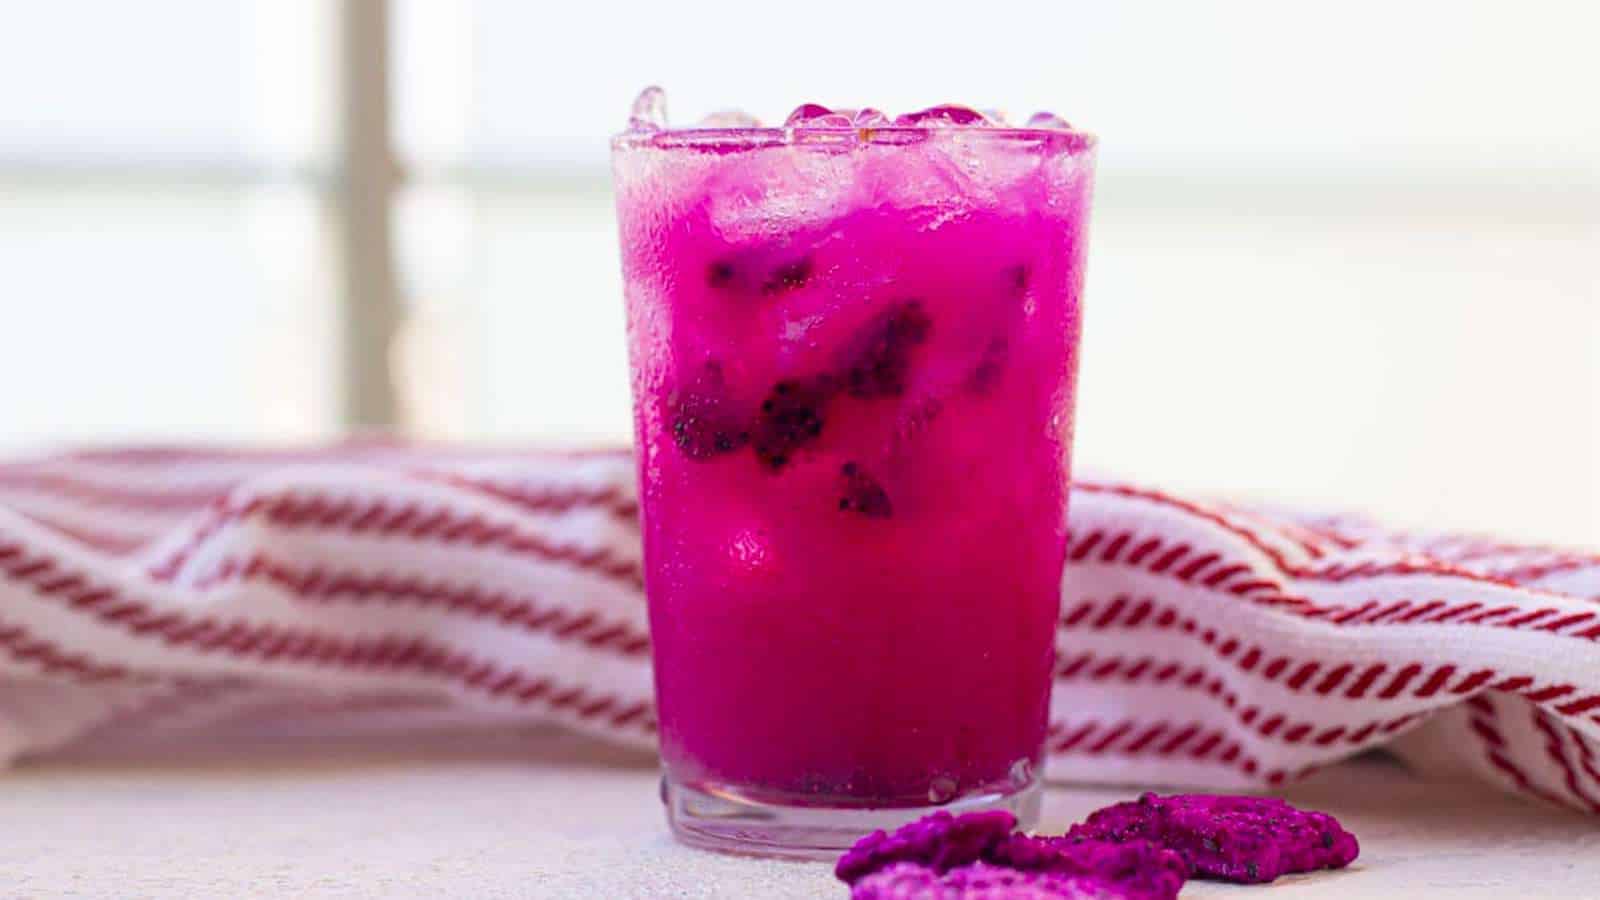 A pink drink with ice, berries, and a table.